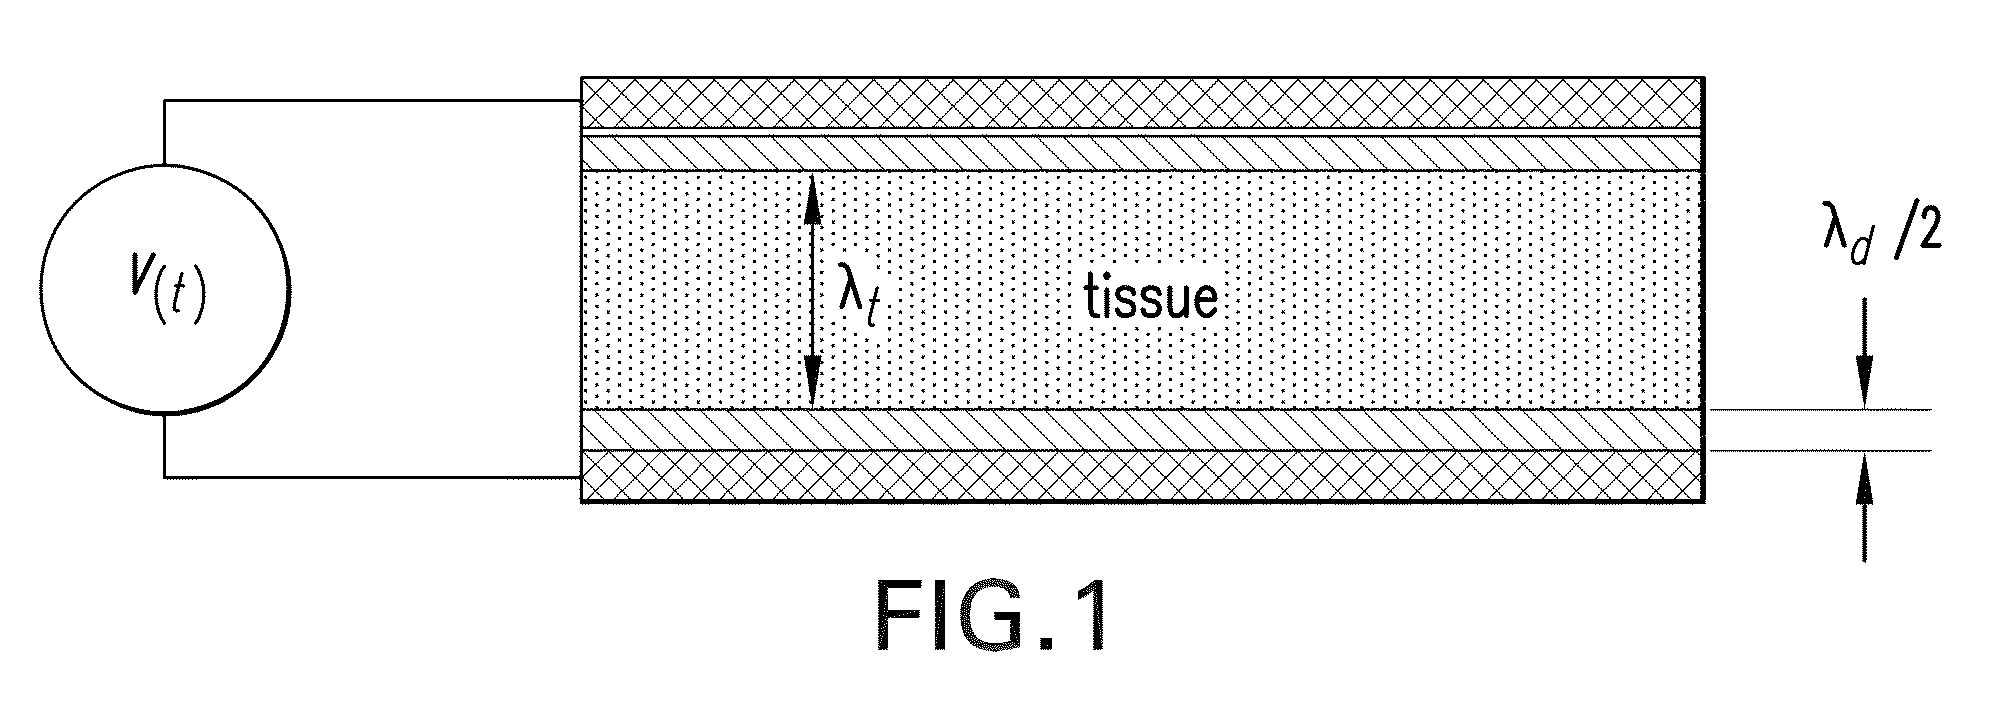 Electrode geometries and method for applying electric field treatment to parts of the body